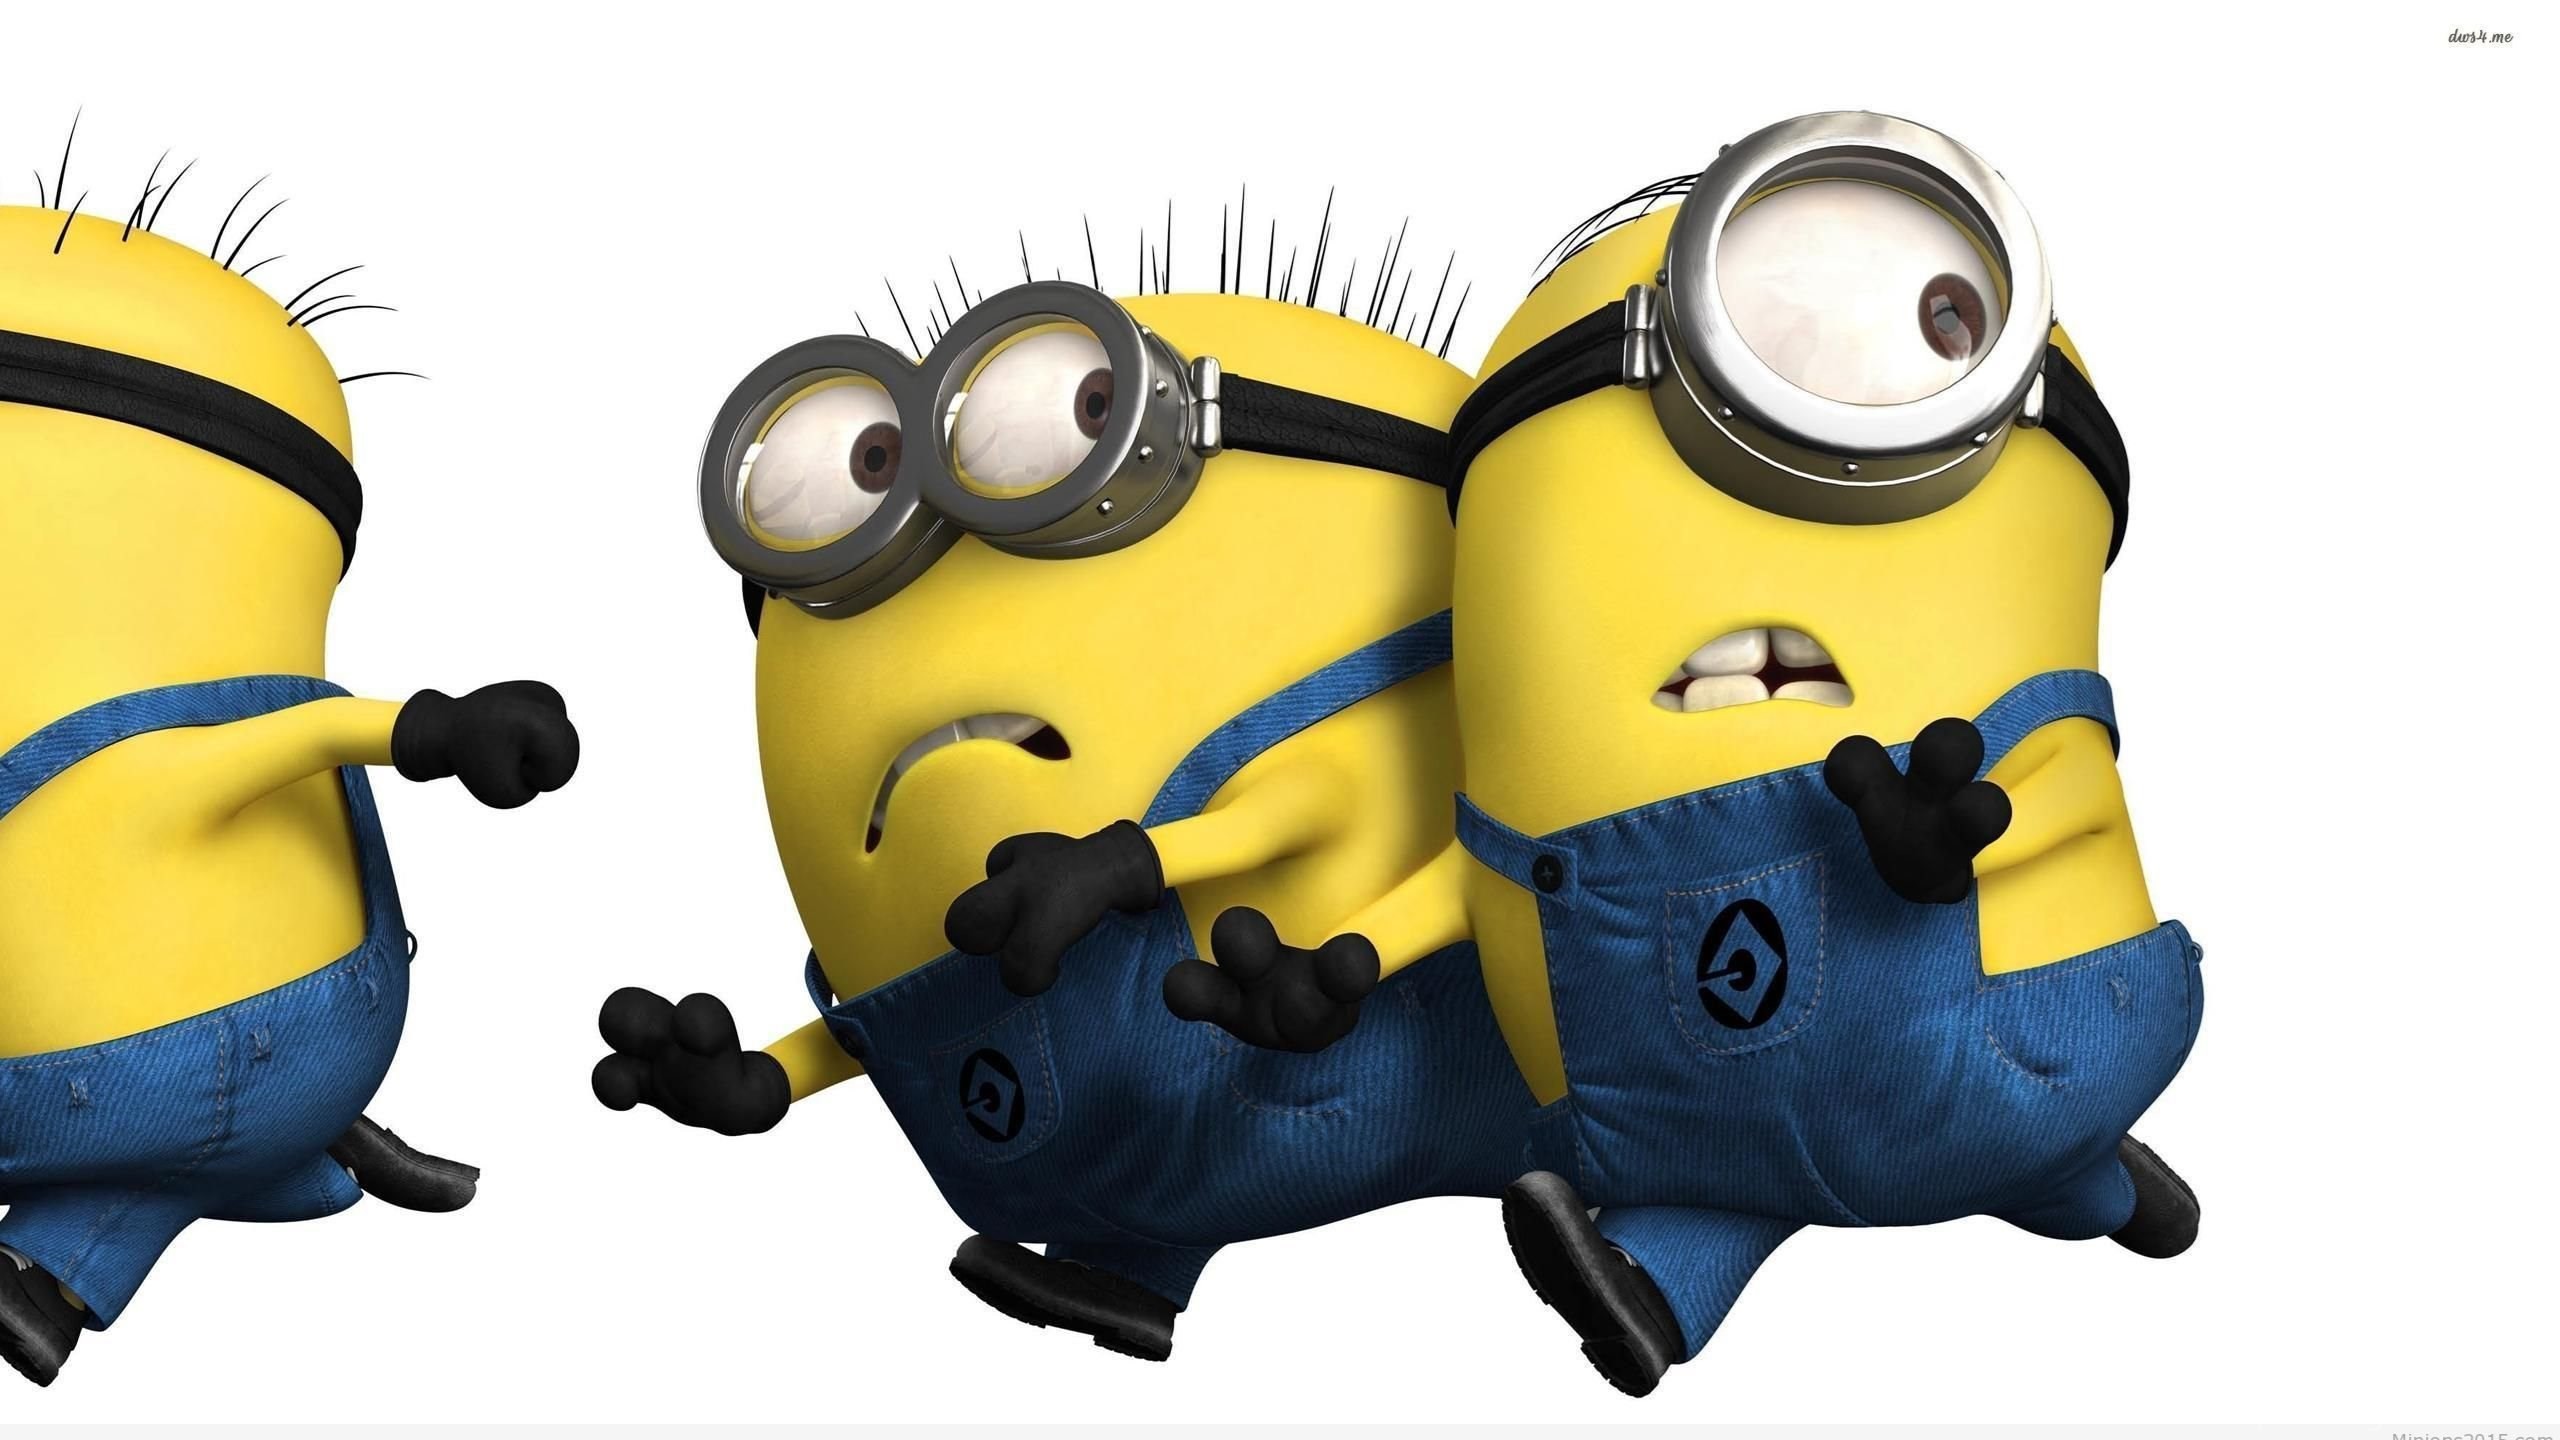 Funny Minions Wallpaper For Desktop (80+ images)